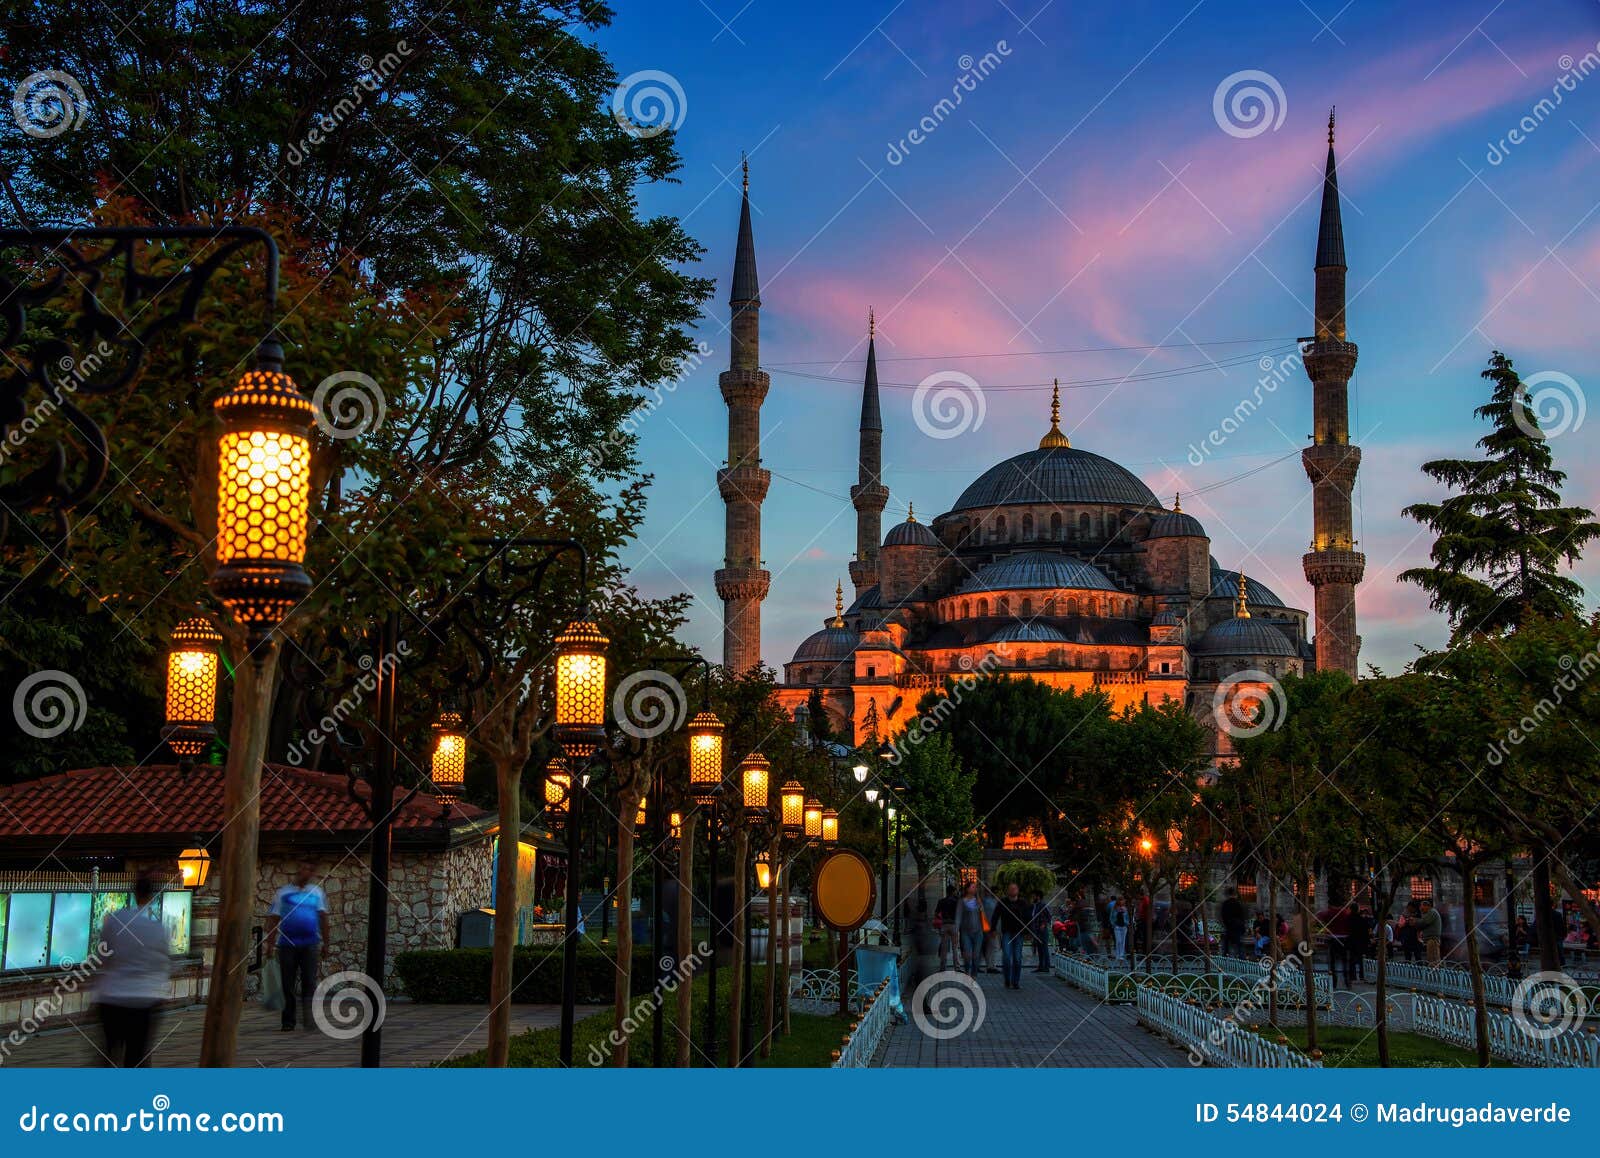 sultan ahmed blue mosque in istanbul, turkey at